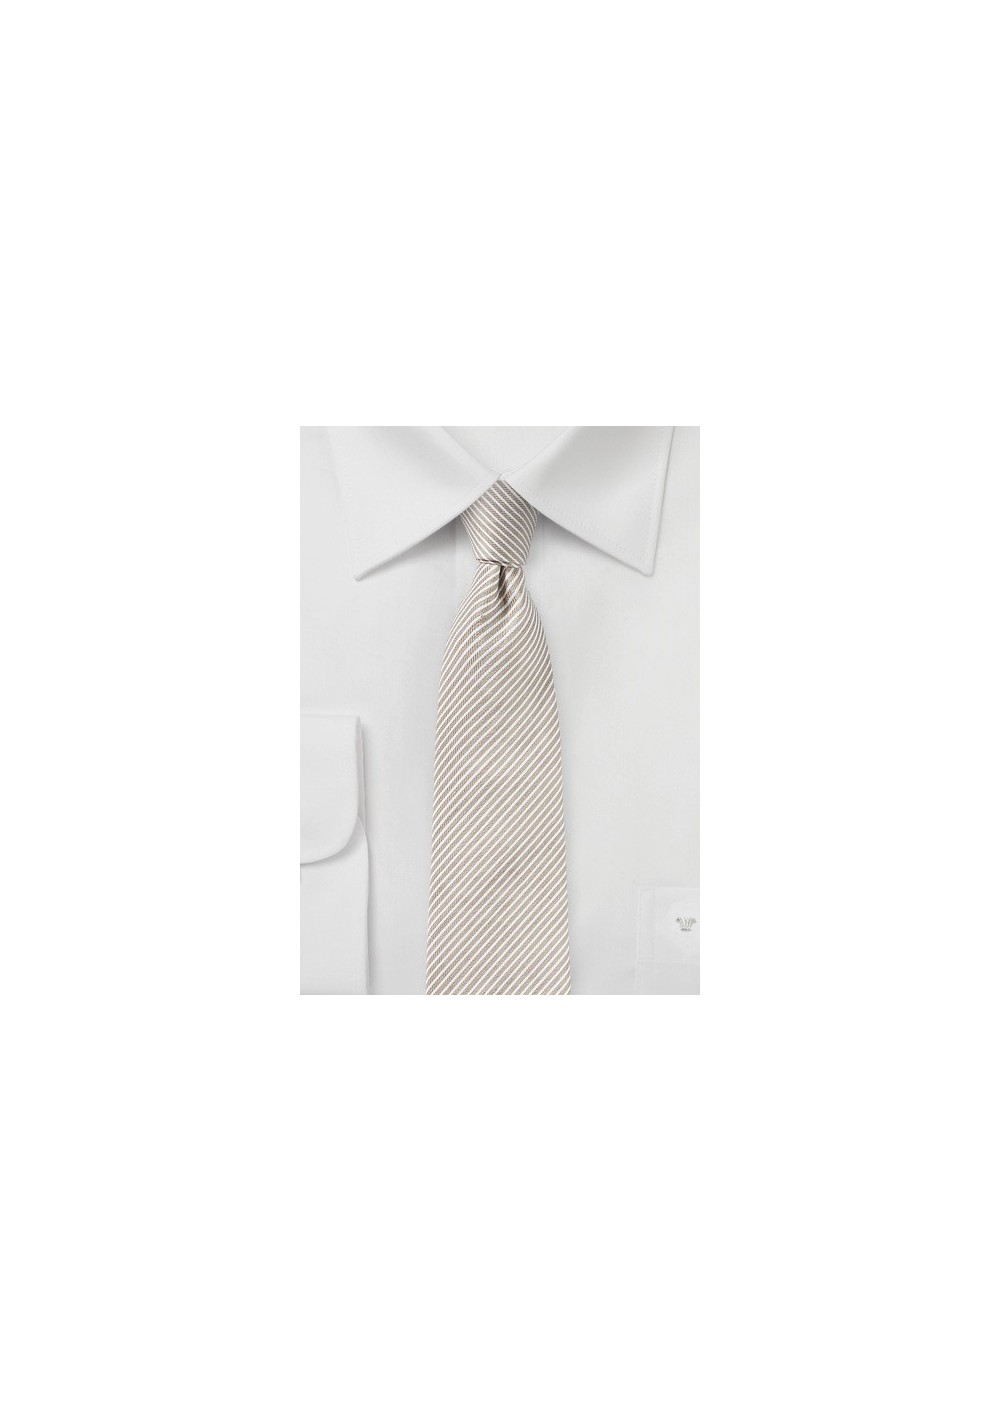 Pencil Stripe Linen Tie in Toasted Almond